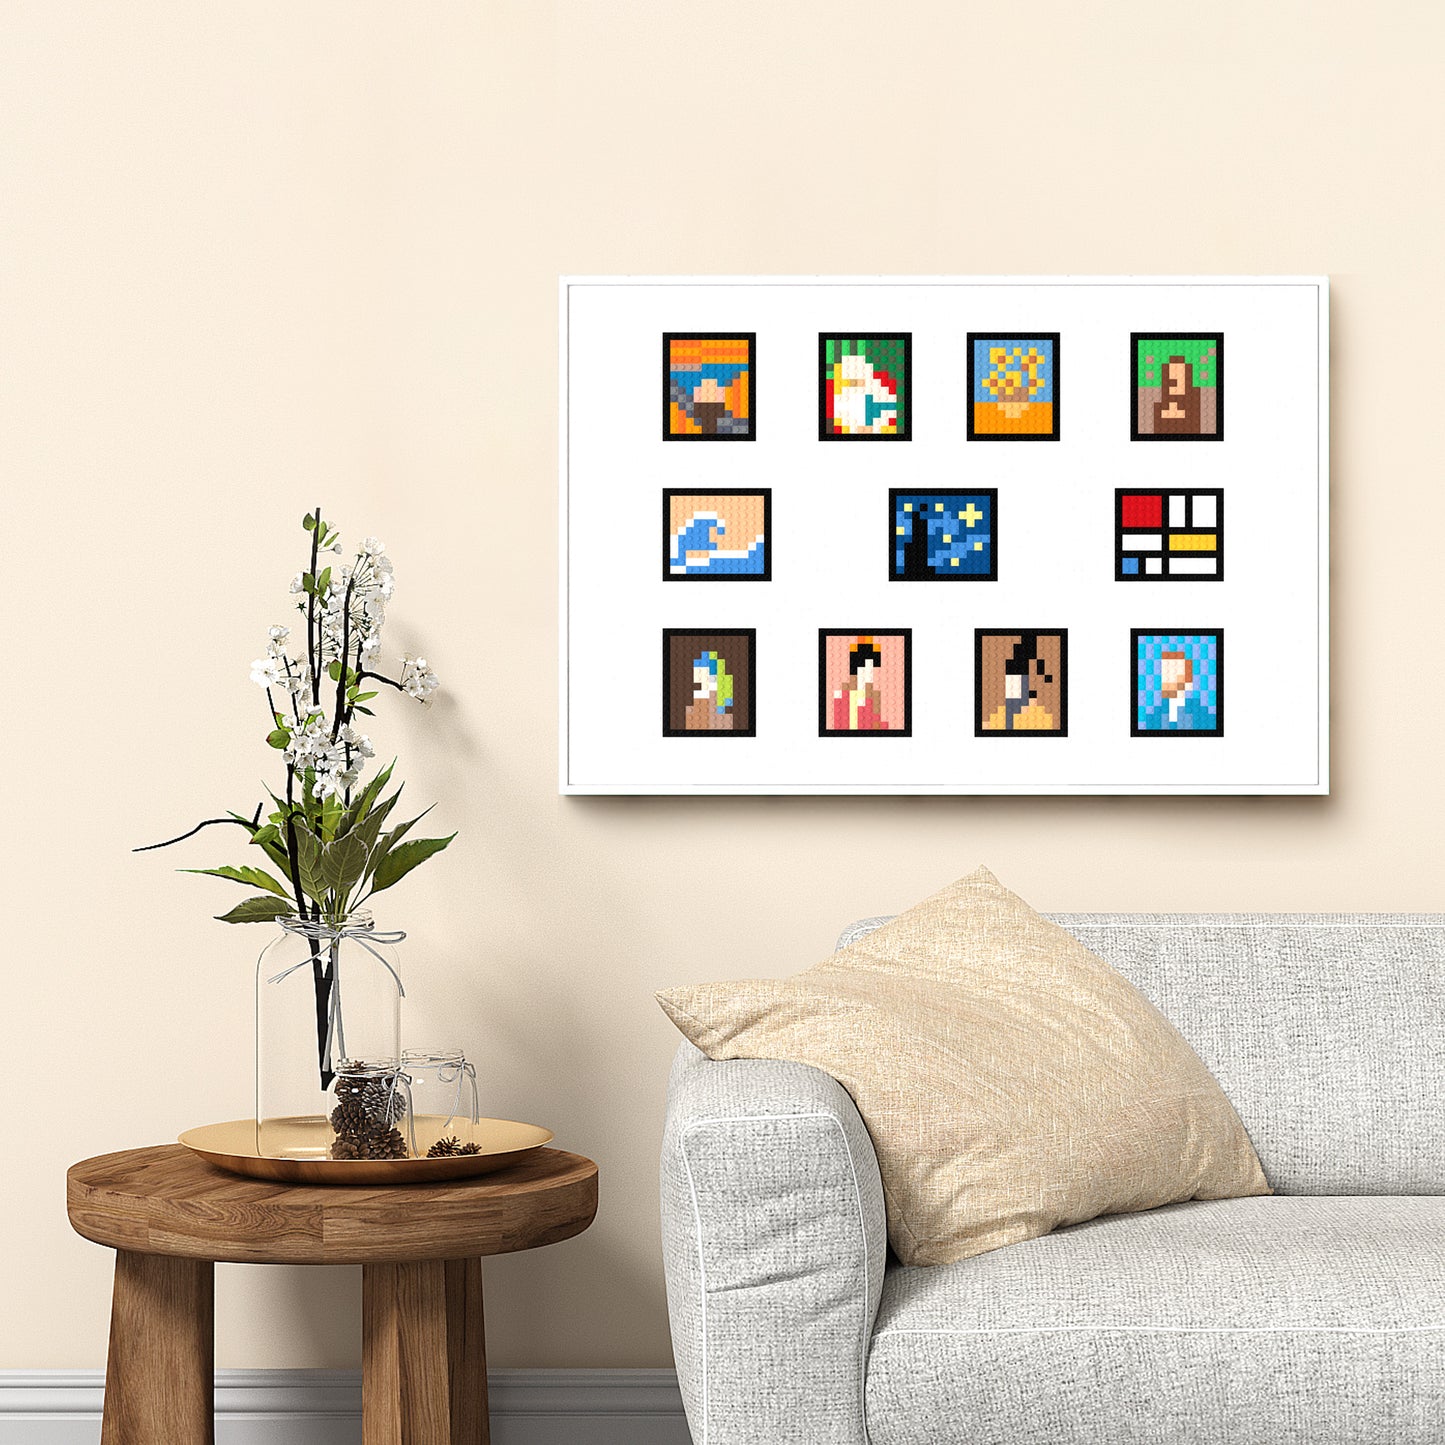 Collection of 11 Famous Painting Abstracts around the World, 96*64 Dots, 100% Compatible with Lego, Framed